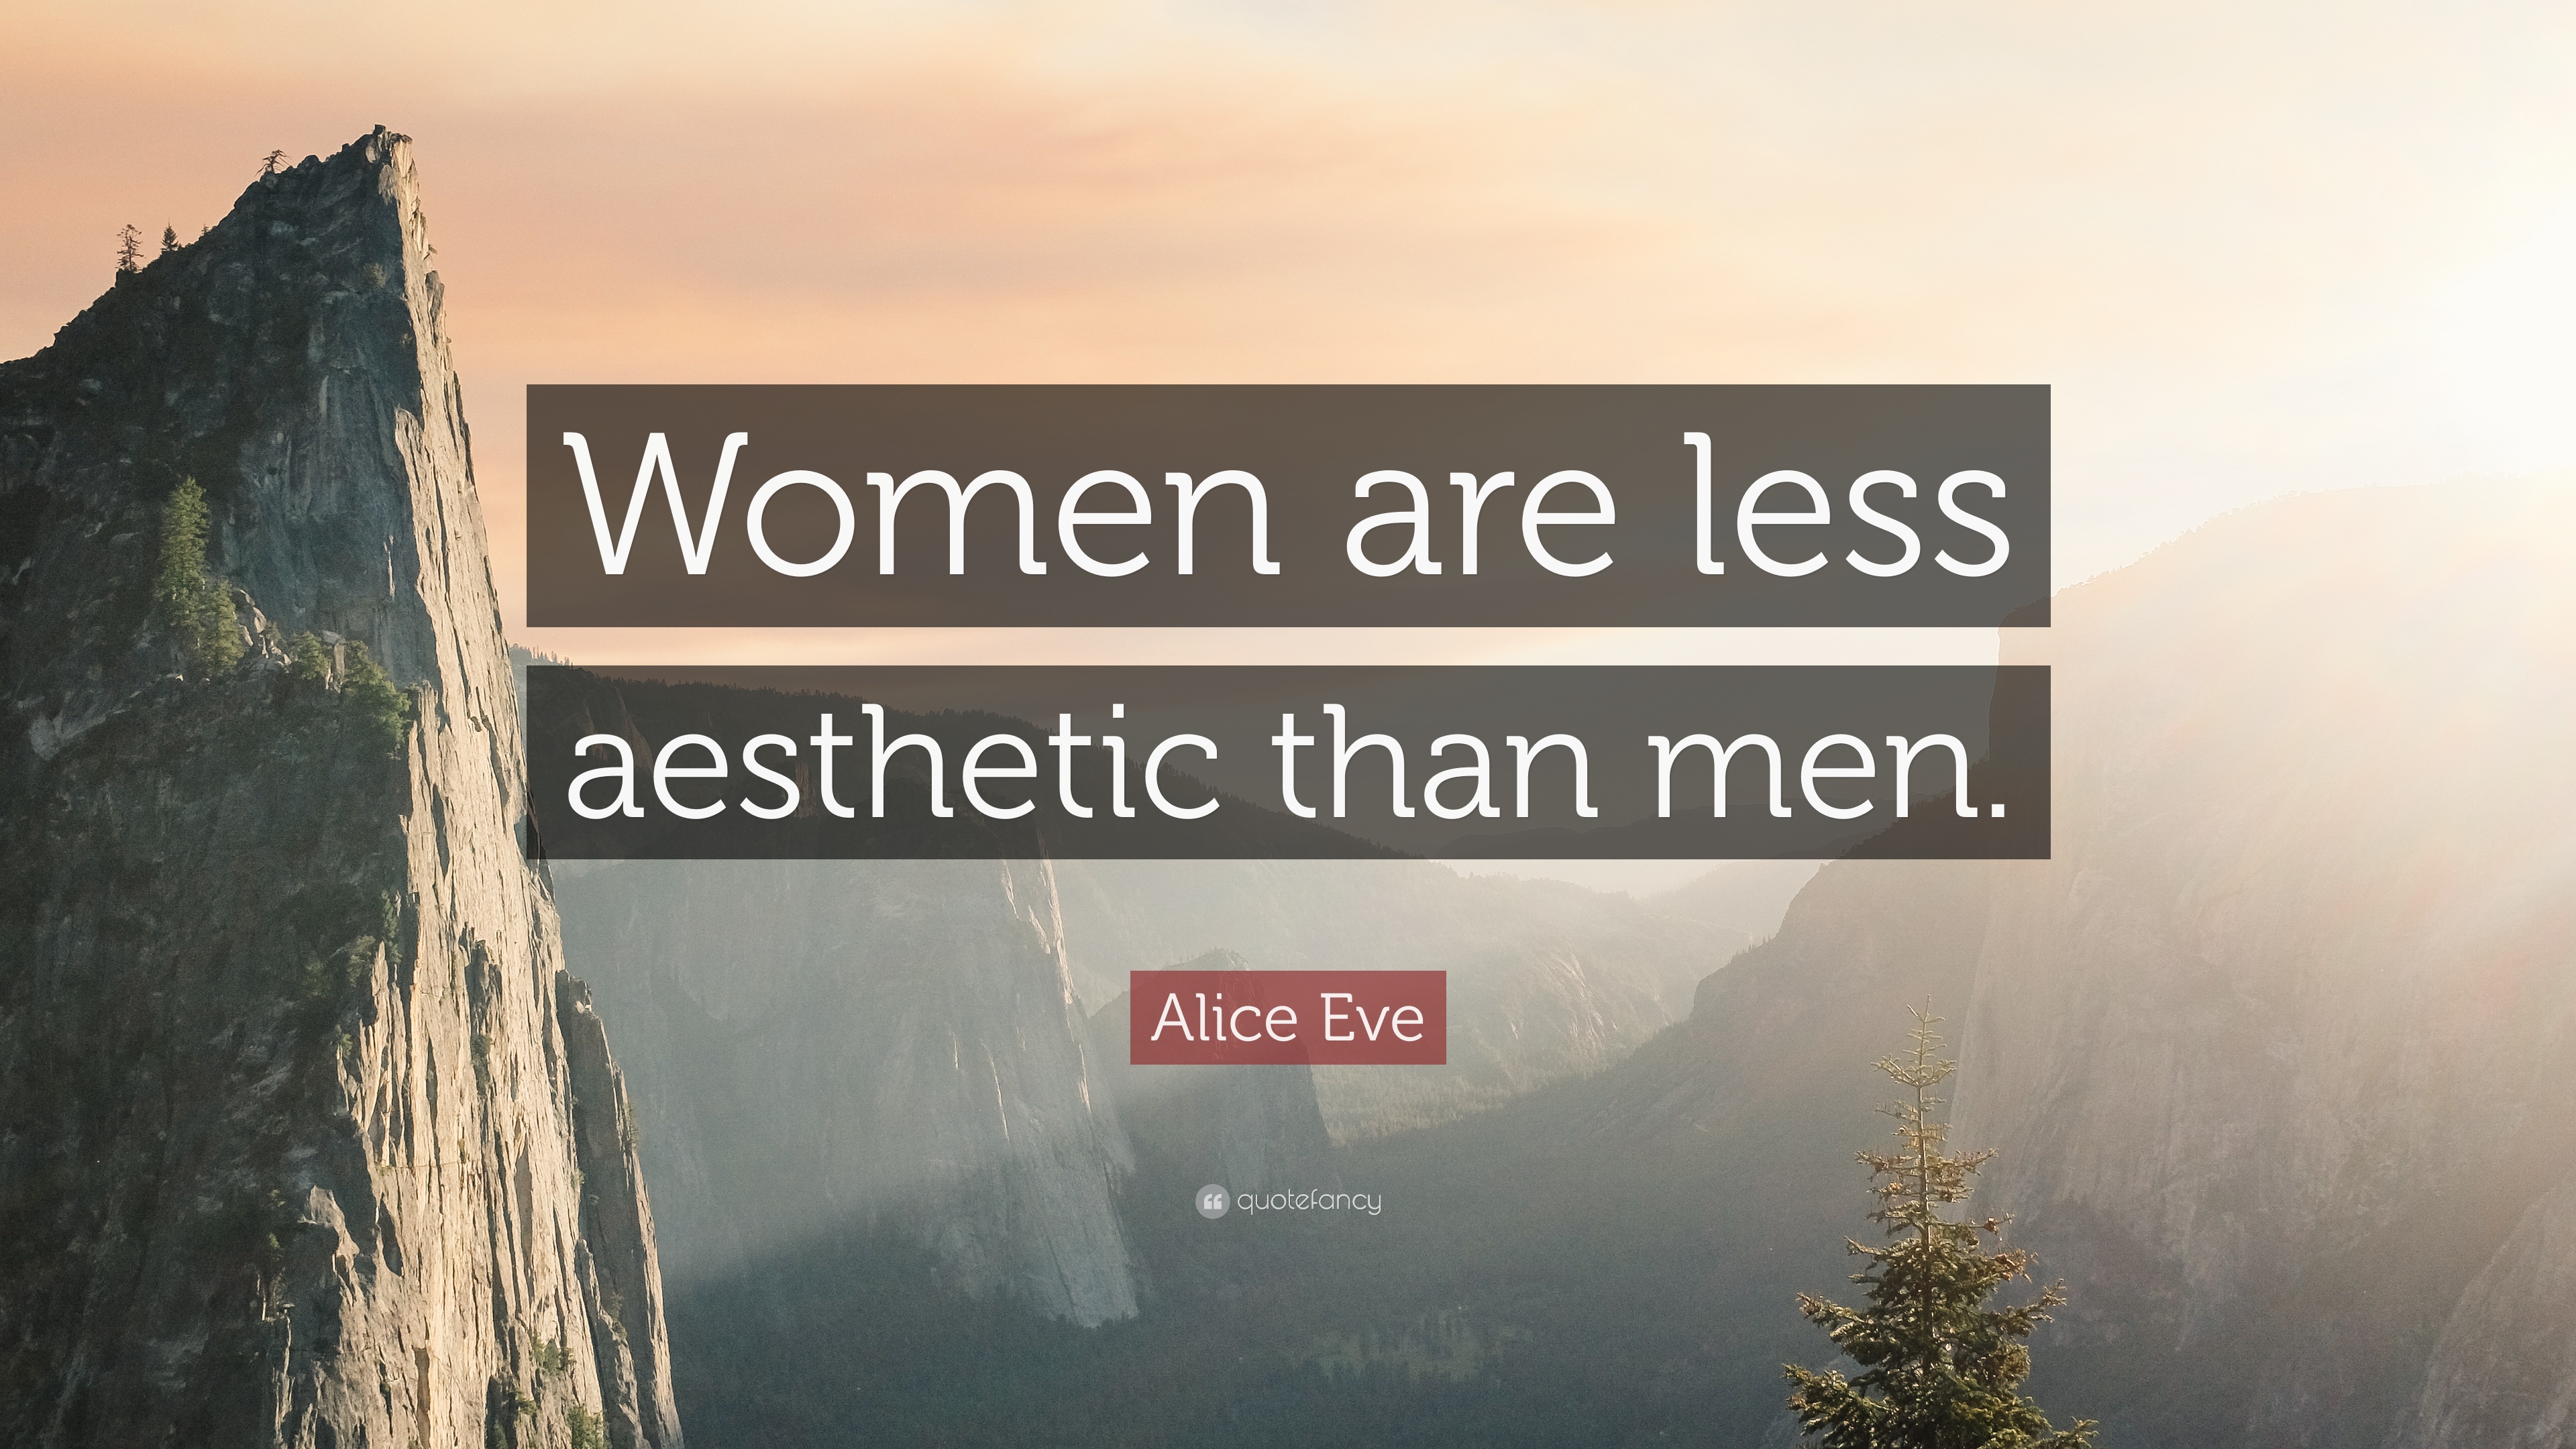 Alice Eve Quote: “Women are less aesthetic than men.” 7